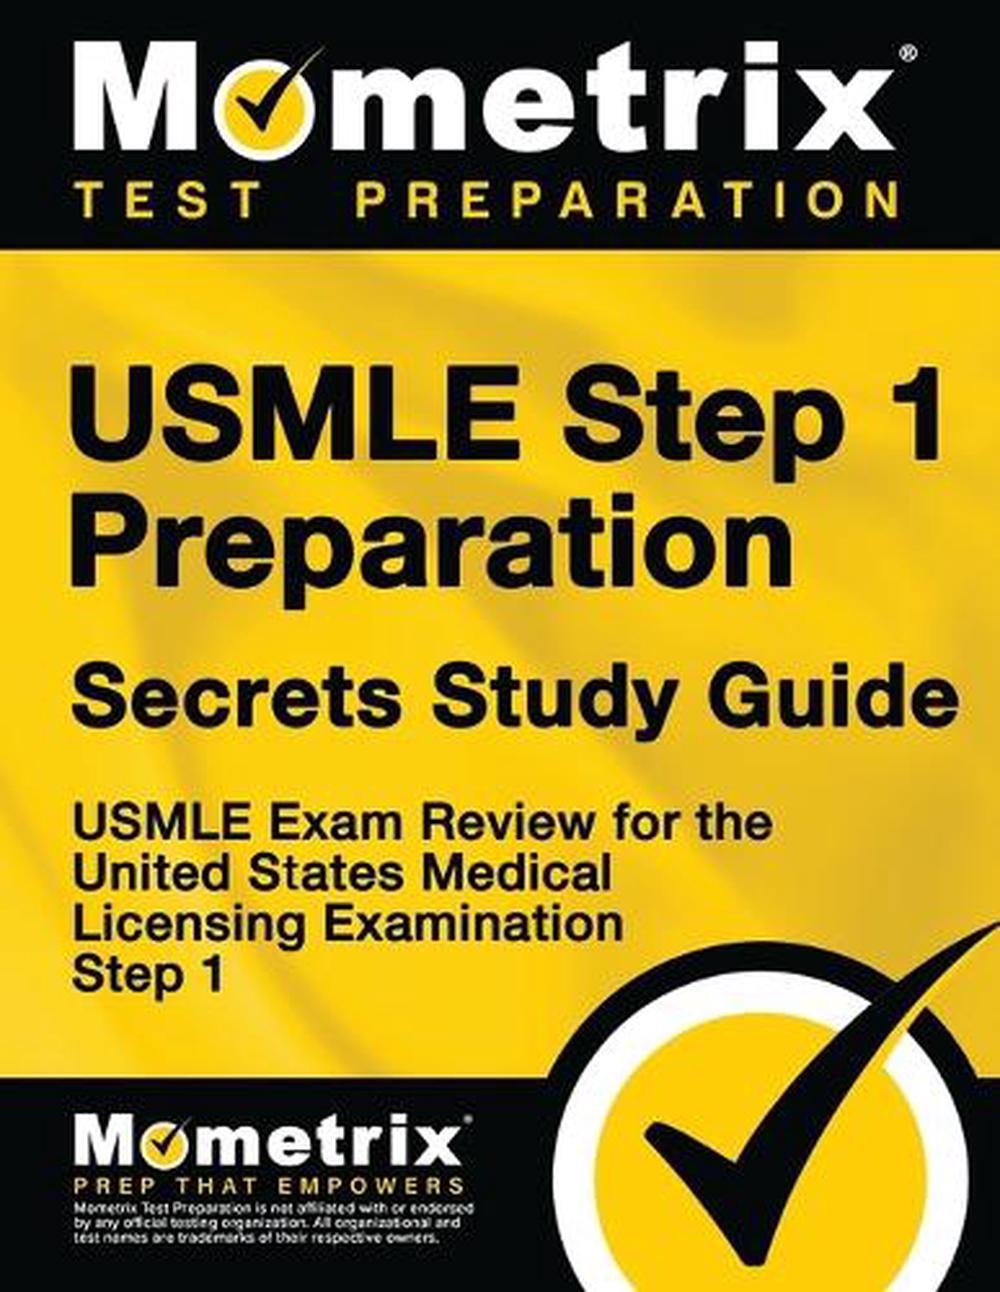 doctor in training step 1 video for the usmle step 1